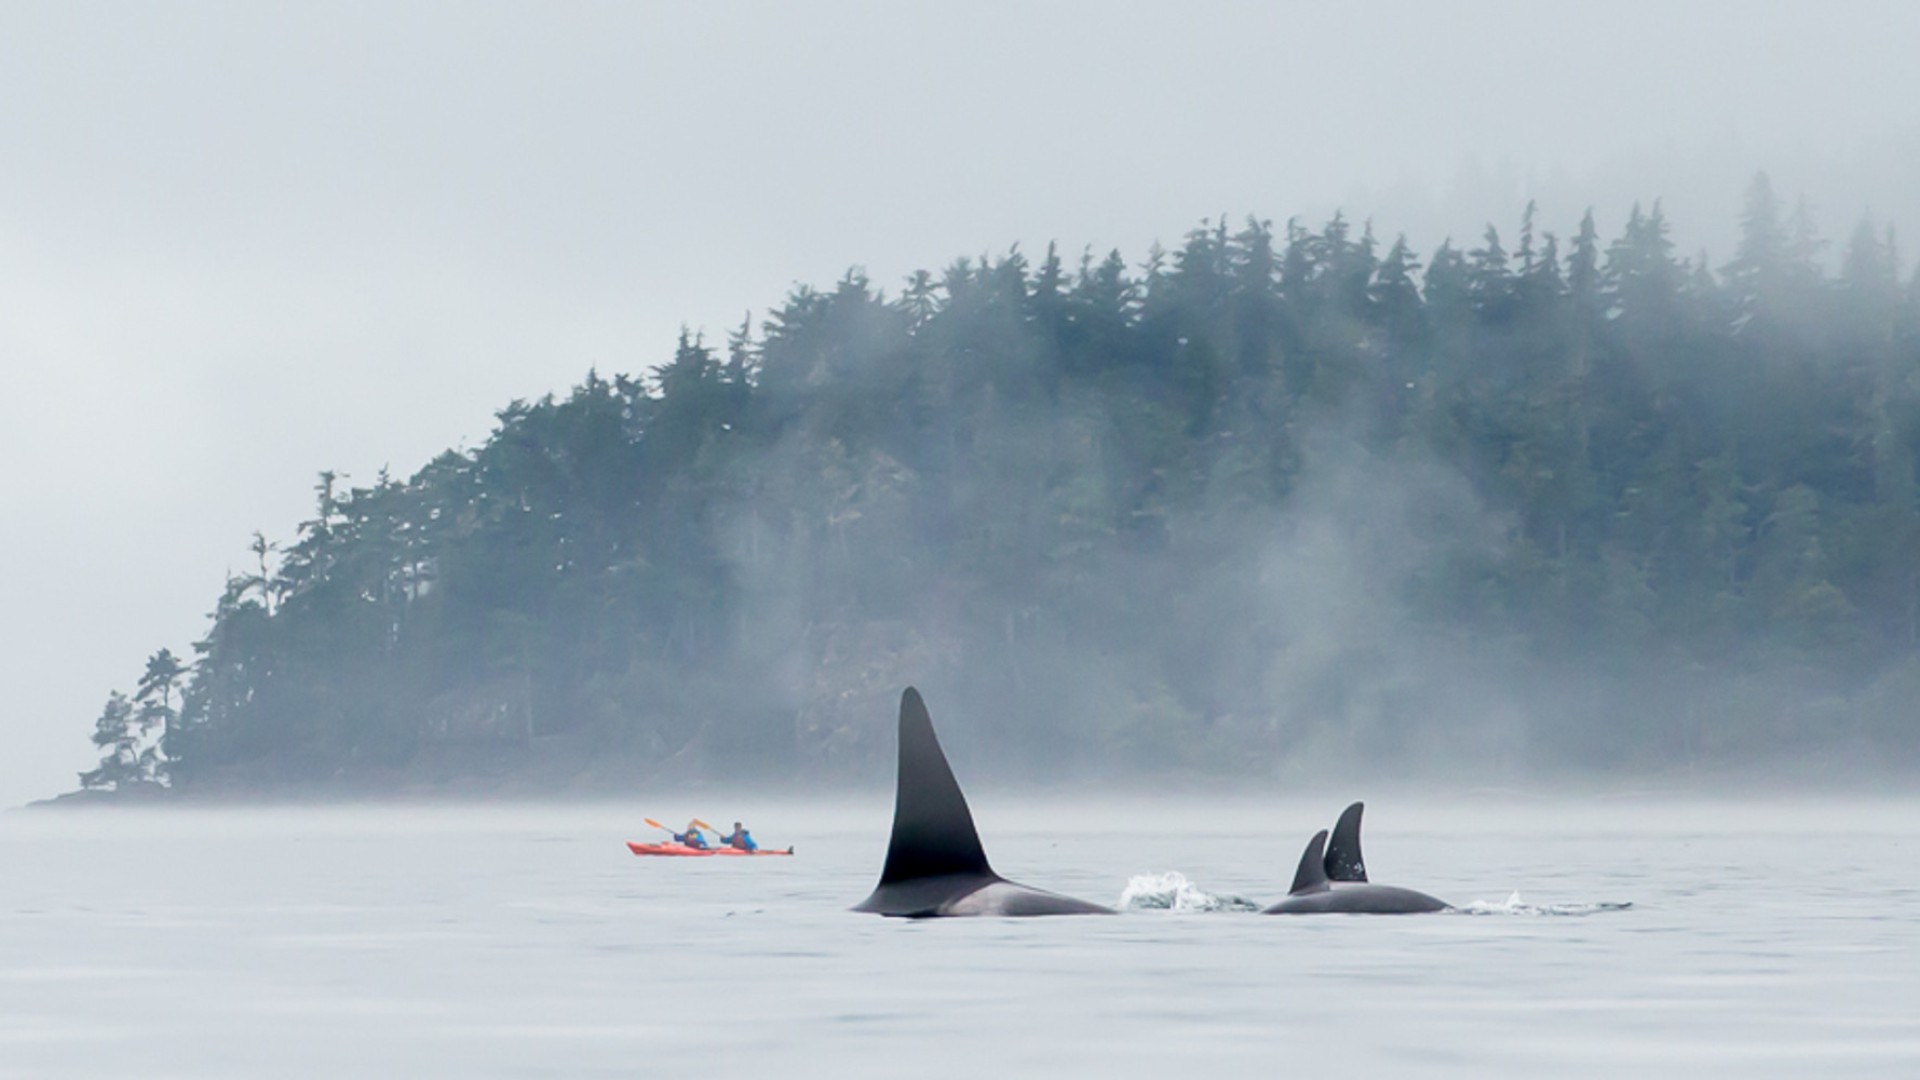 Sea kayaks paddling through a misty morning off the coast of Vancouver Island